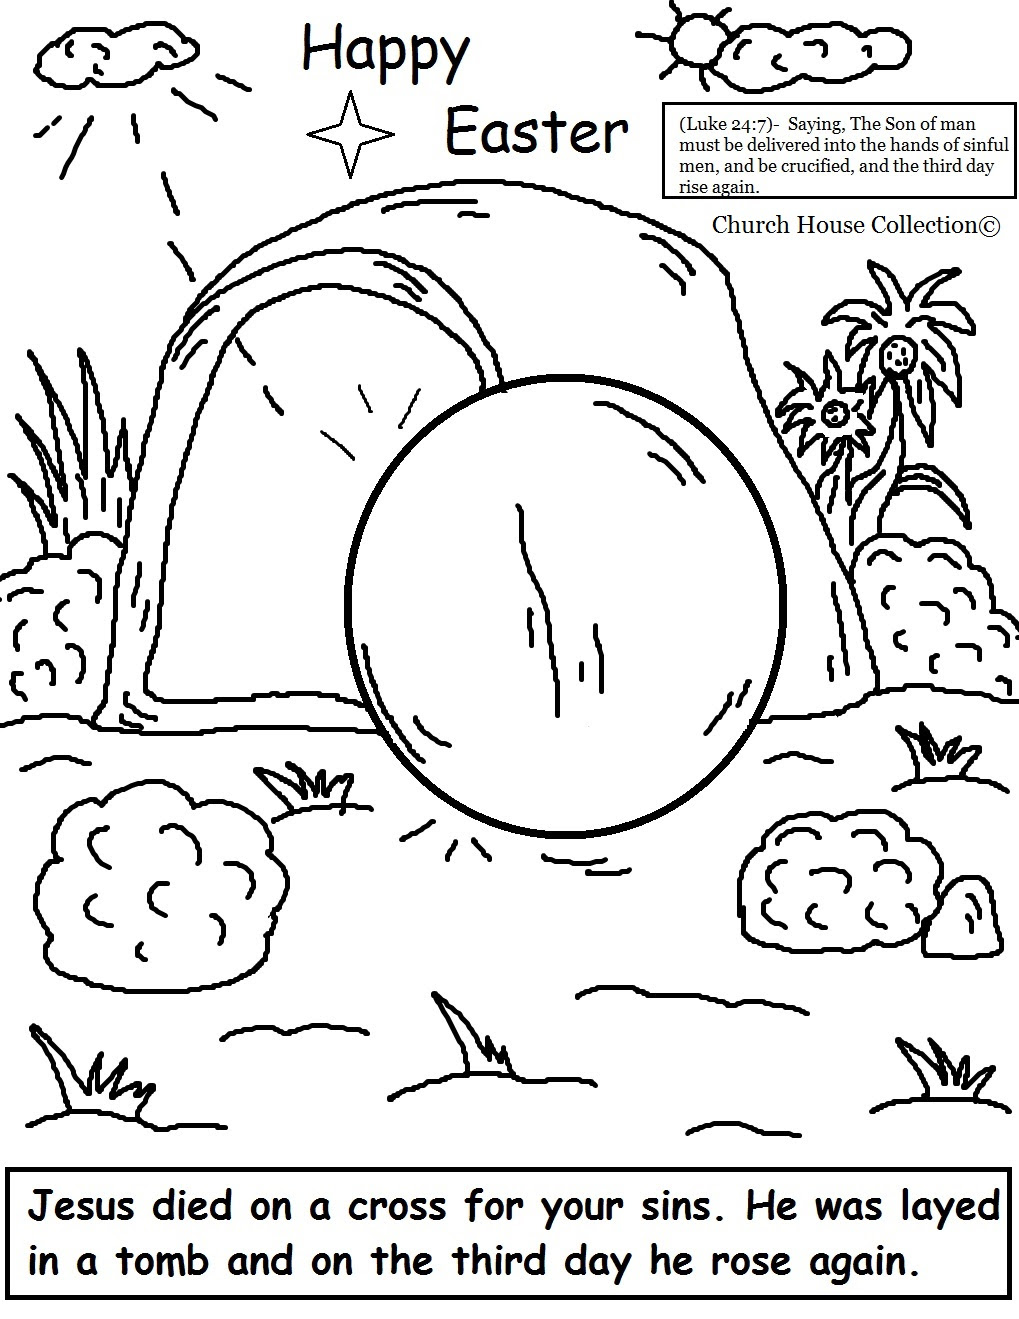 Download Printable Religious Easter Coloring Pages | Coloring Pages ...